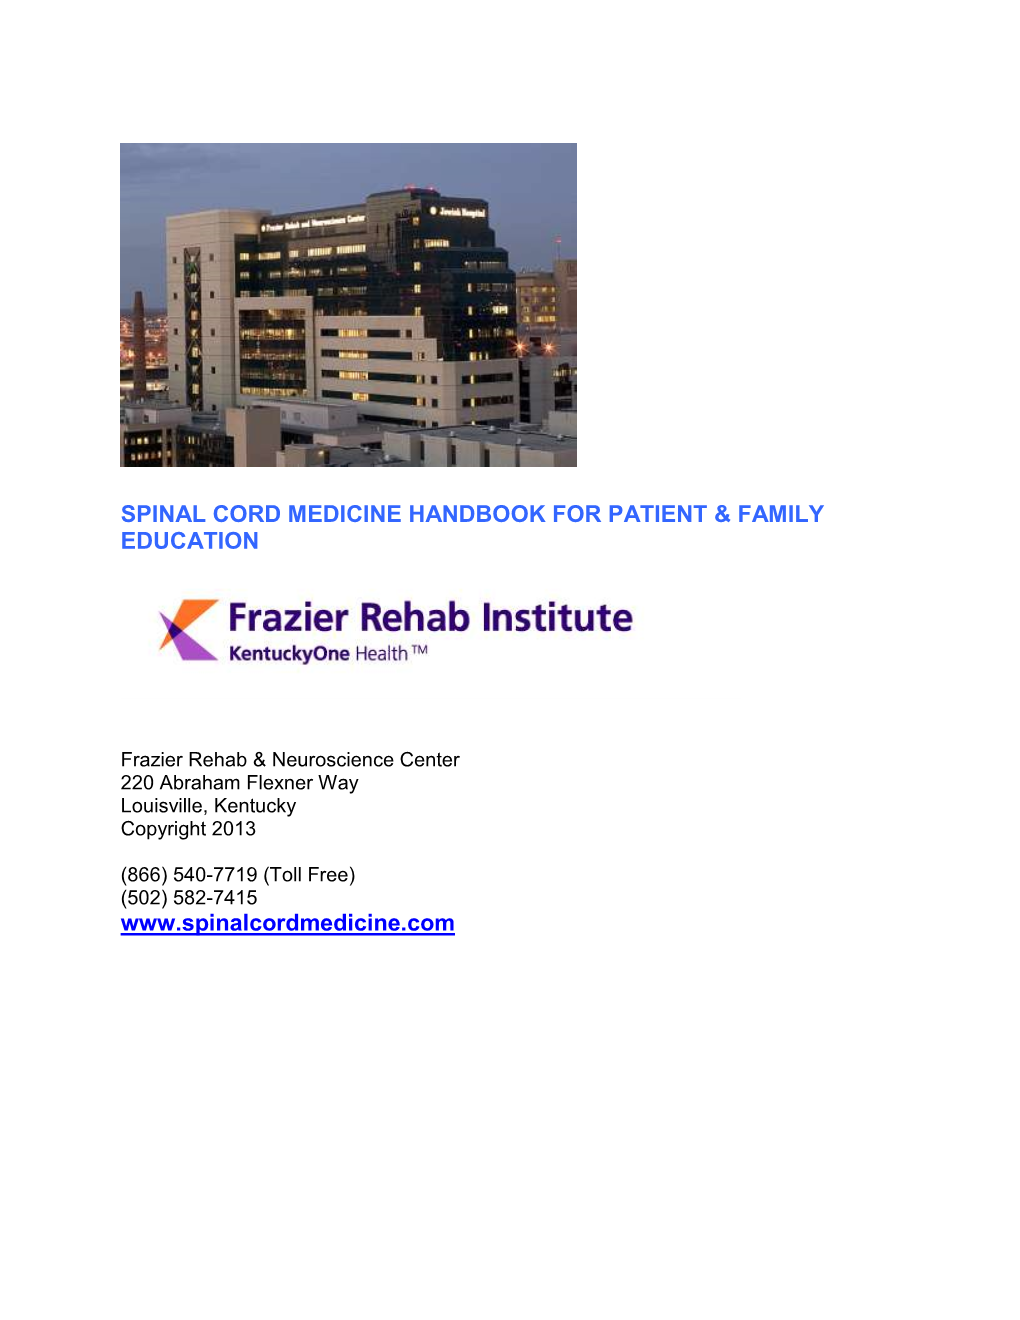 Spinal Cord Medicine Handbook for Patient & Family Education